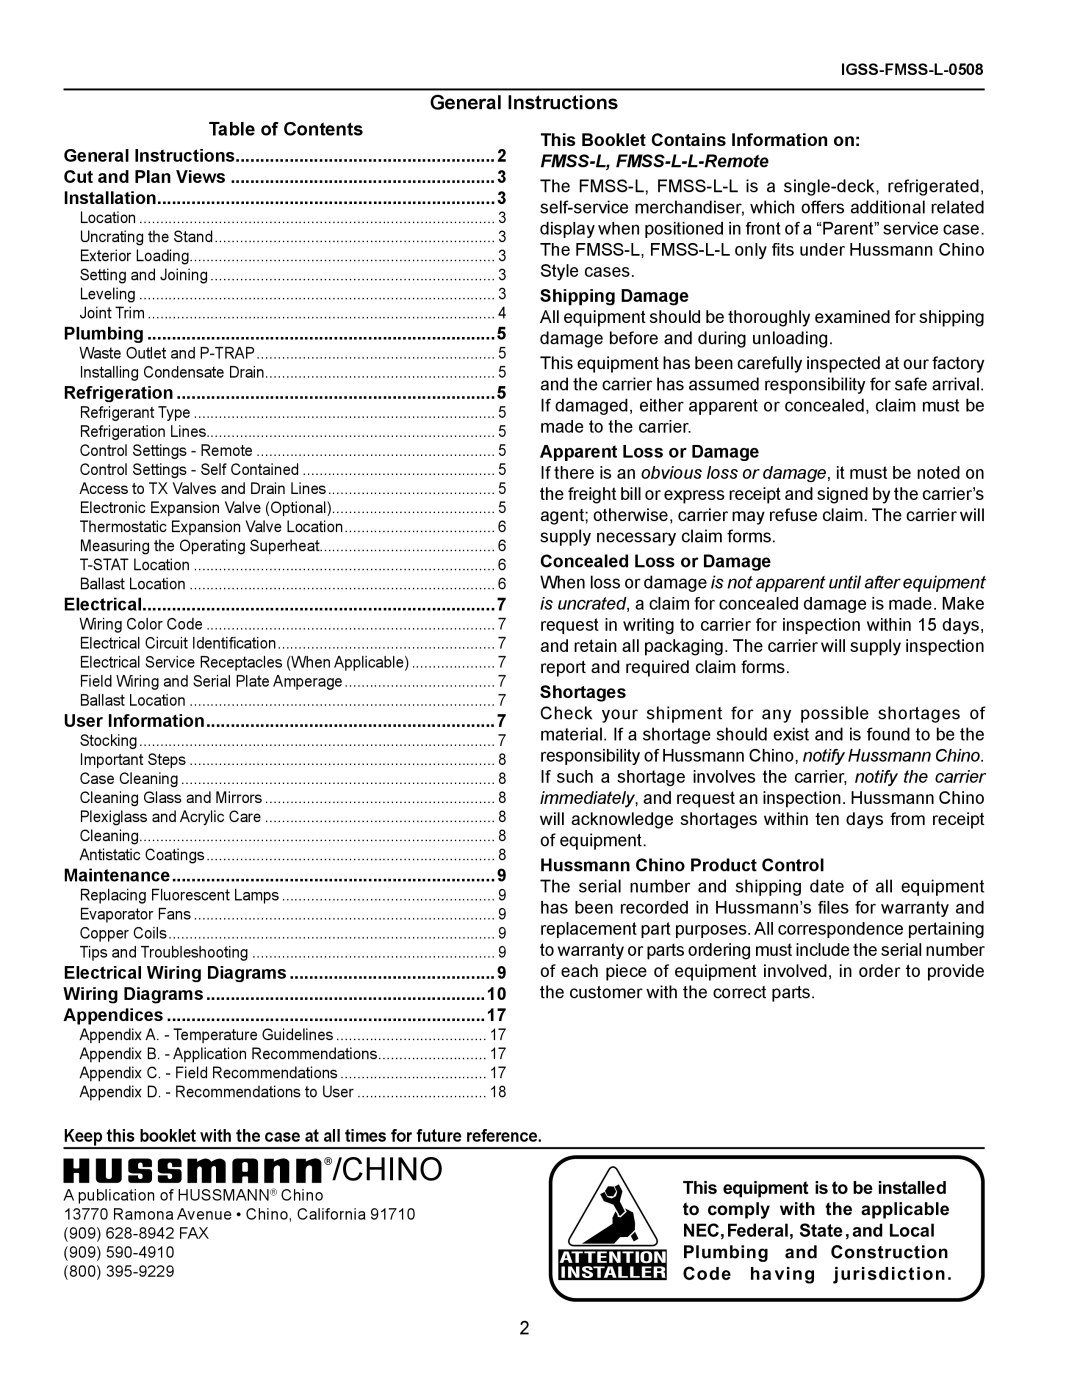 hussman FMSS-L General Instructions, Table of Contents, Chino, This Booklet Contains Information on, Shipping Damage 